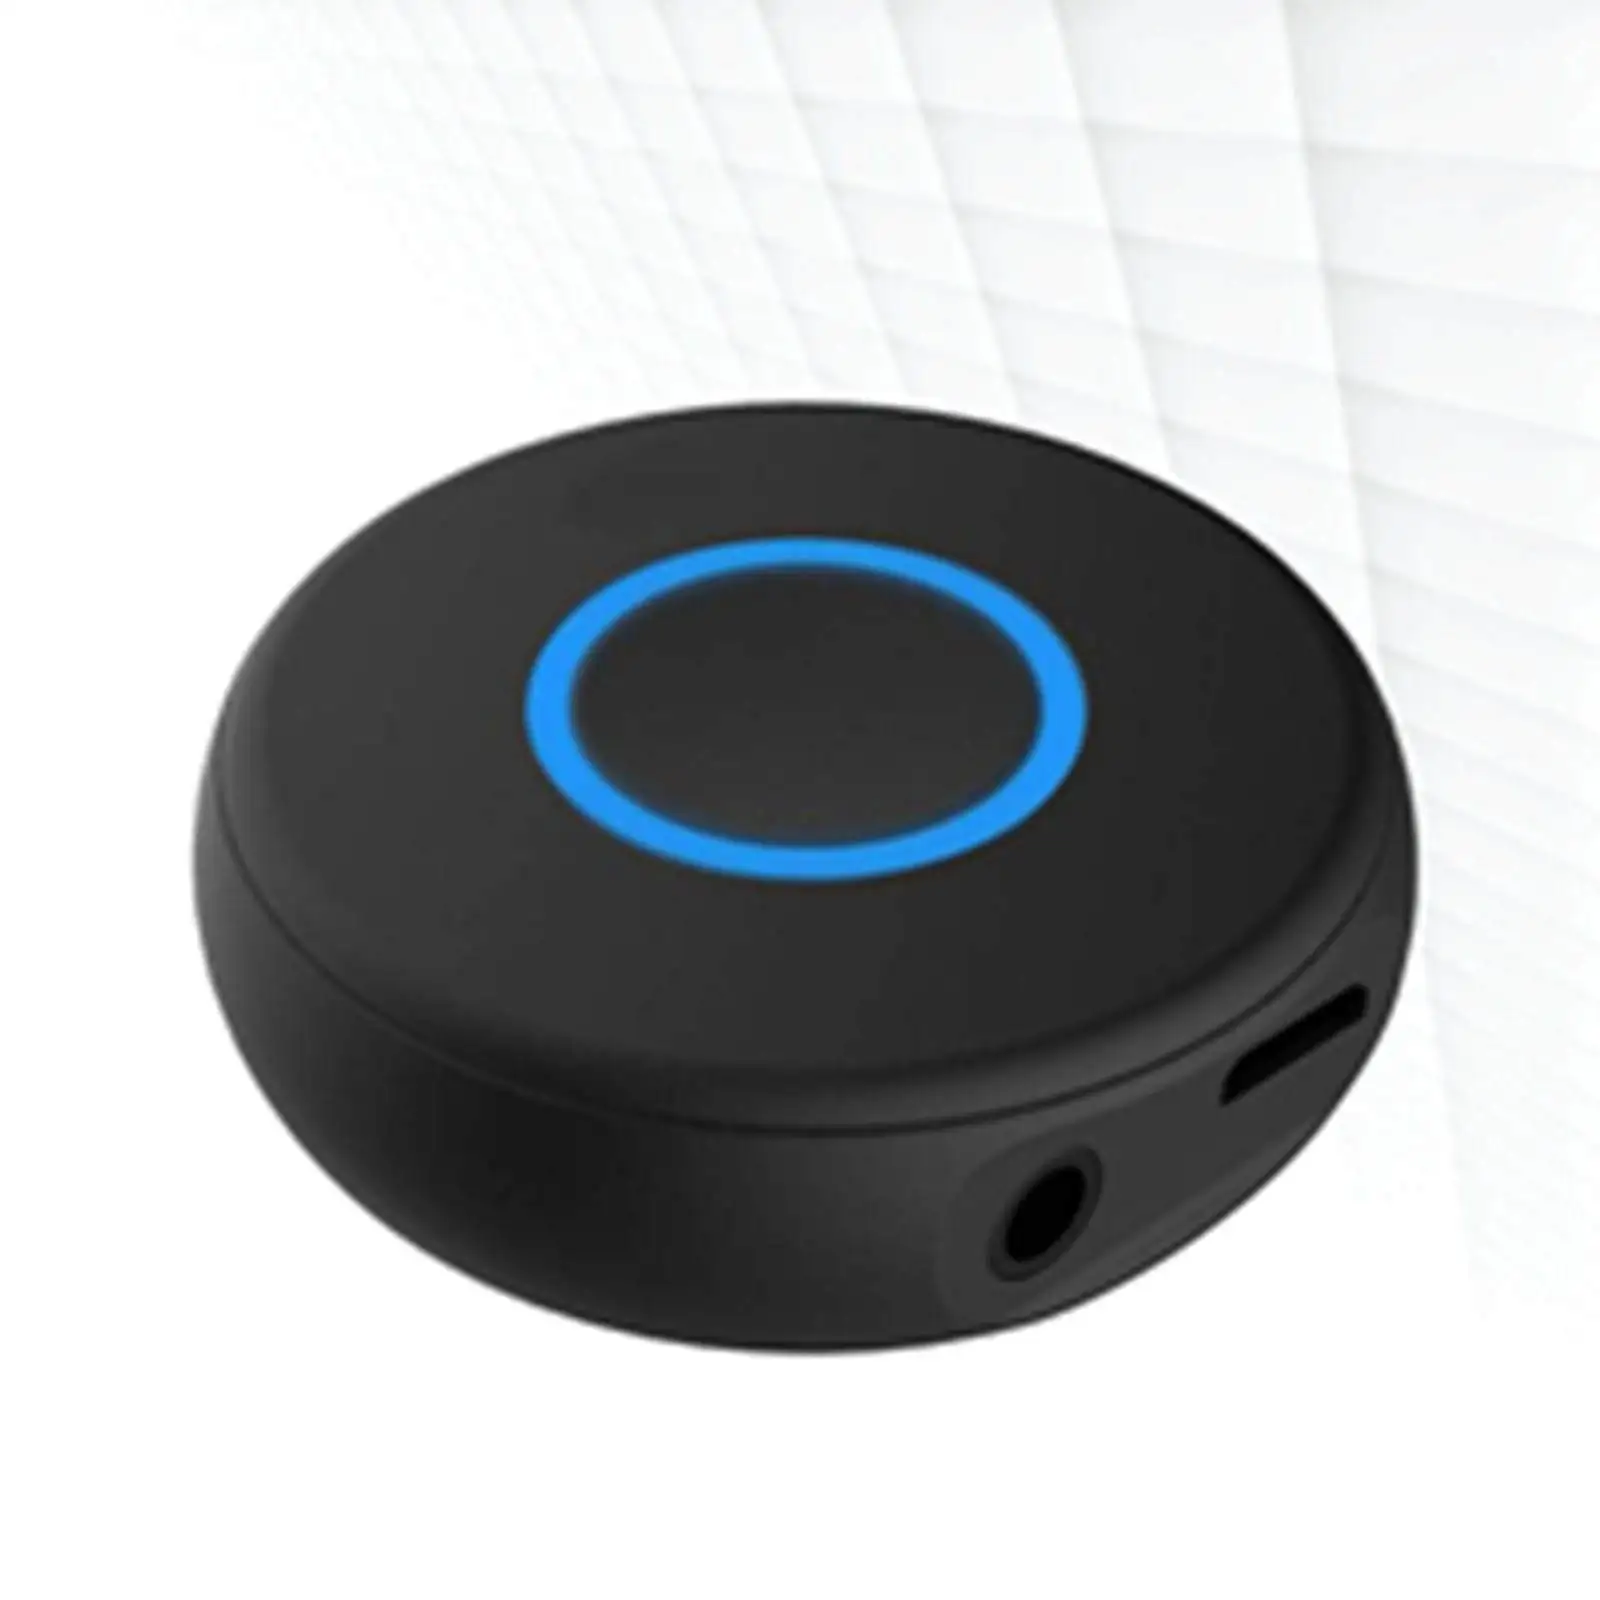 Bluetooth Aux Adapter Transmitter Receiver Wireless Audio Adapter No Audio Delay for TV Headphones Speaker PC Portable